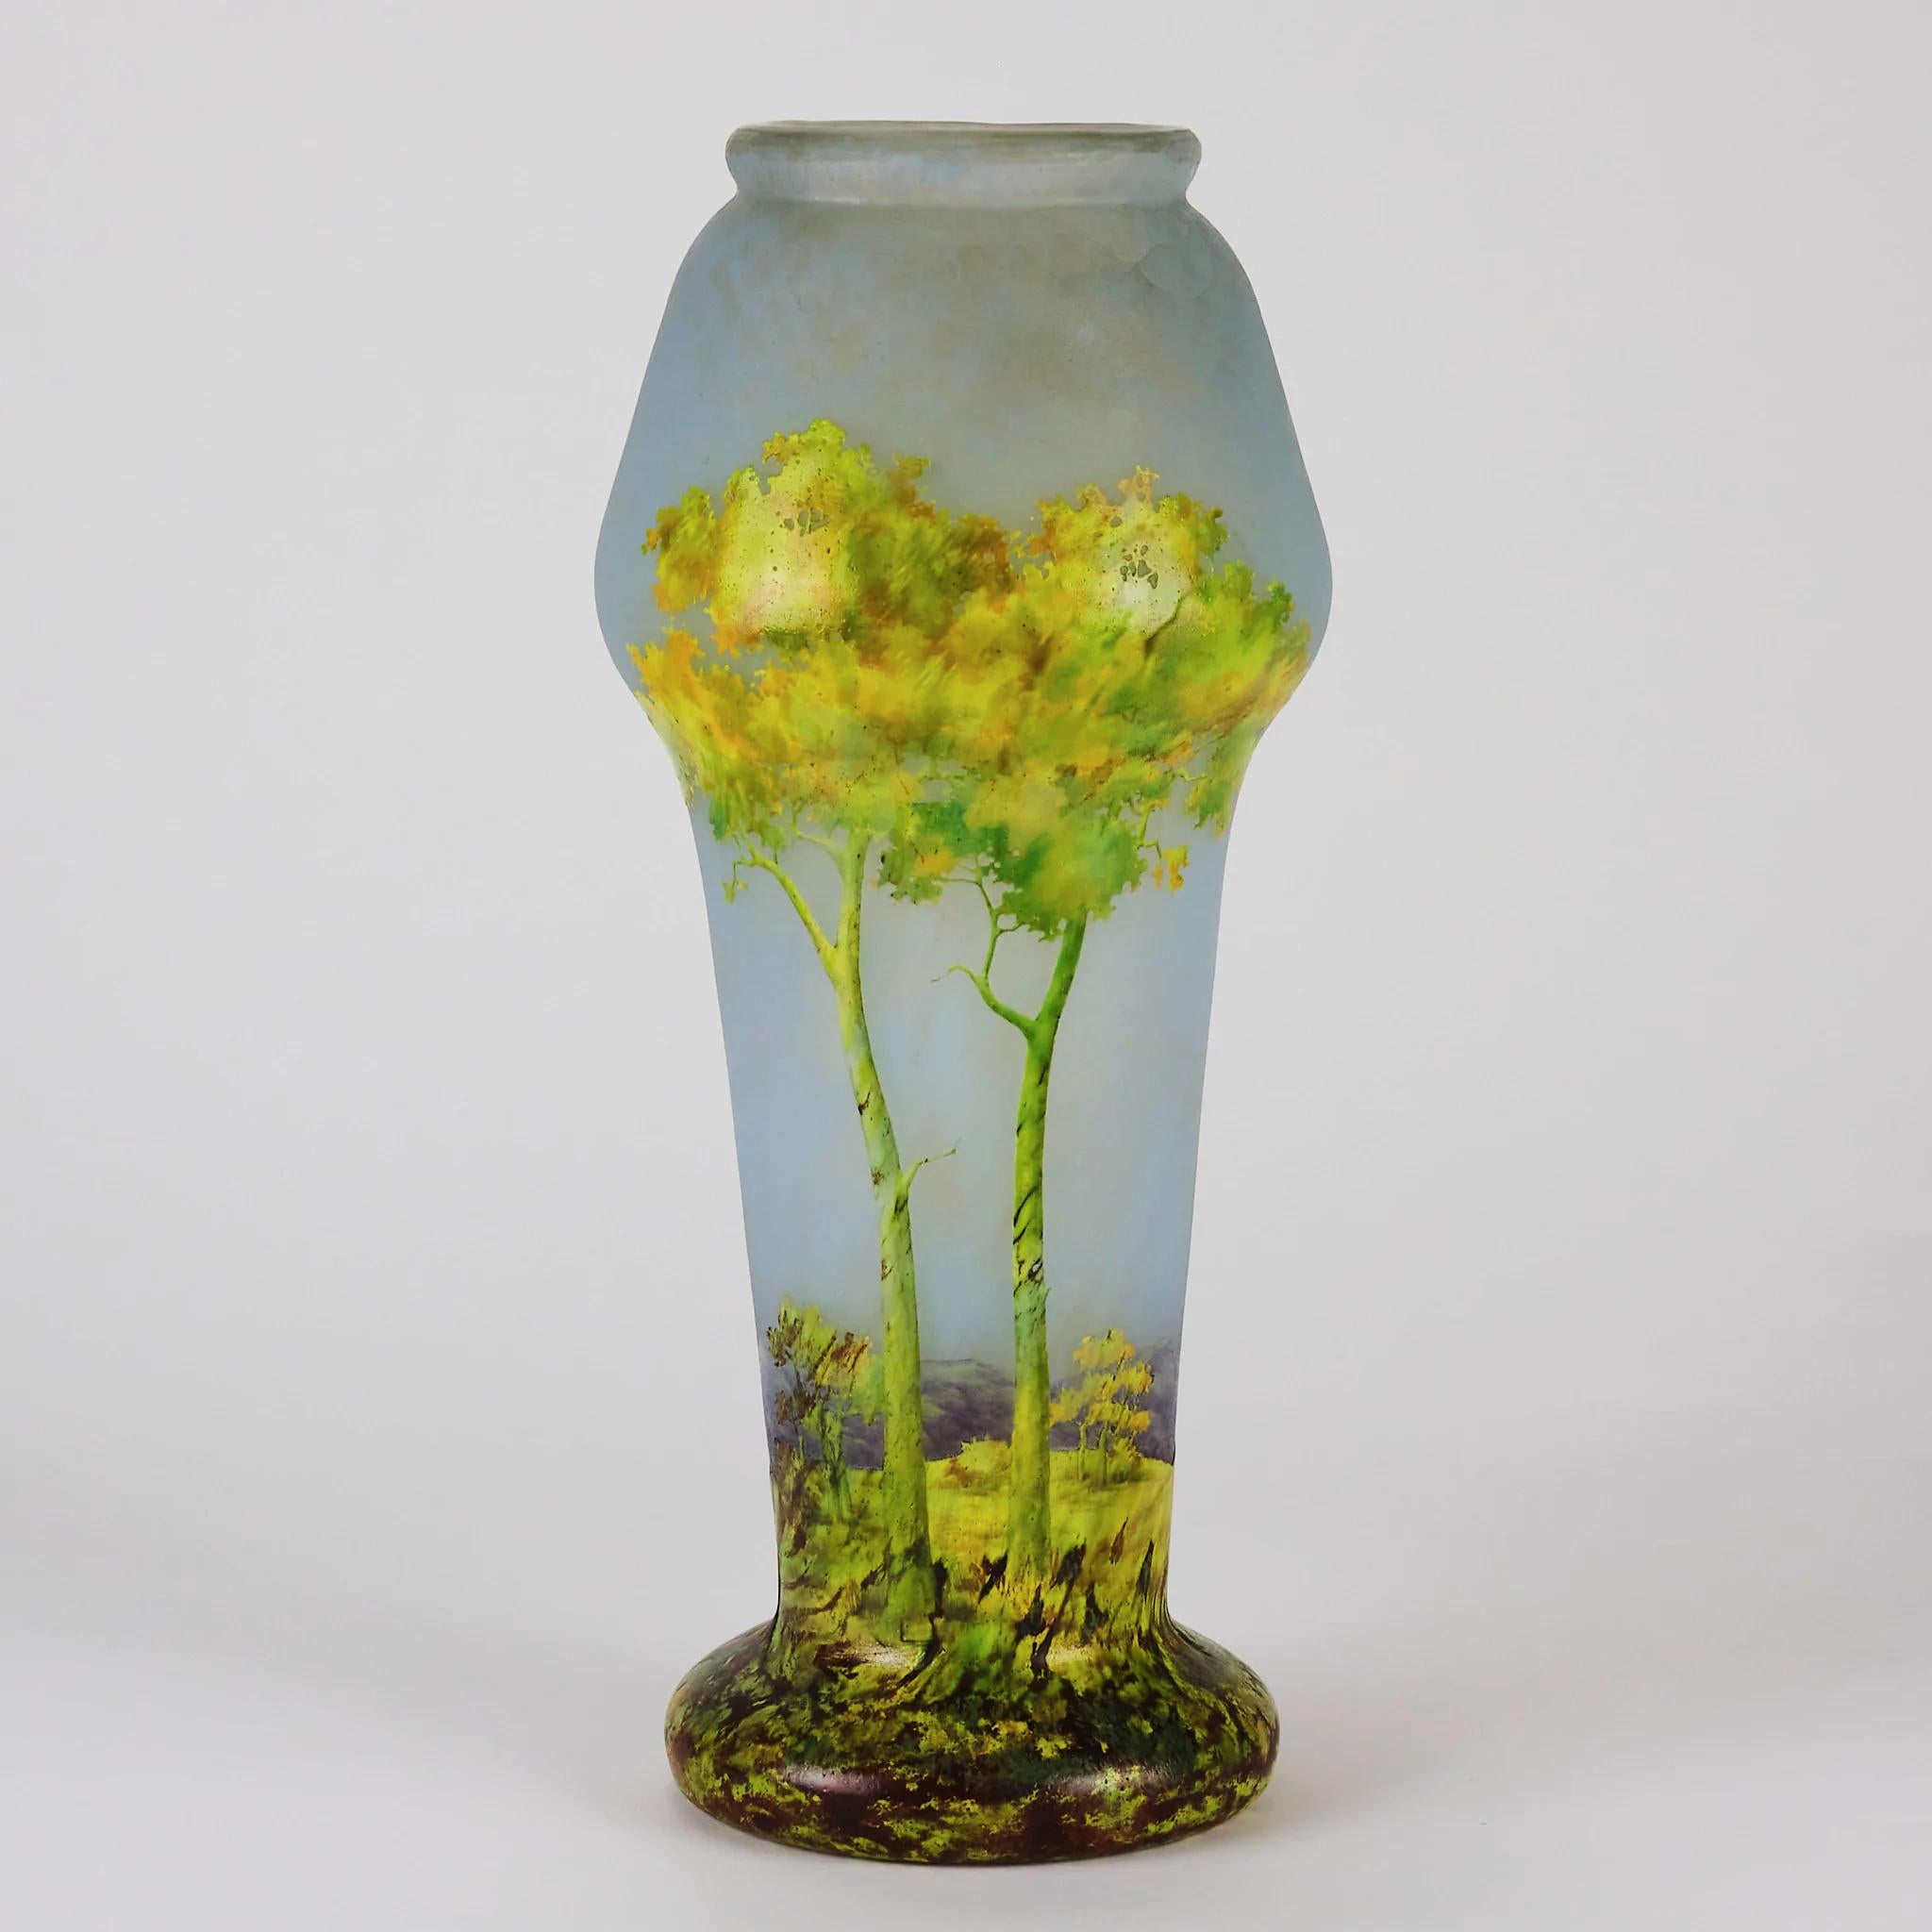 A stunning vibrant cameo glass vase etched and enamelled with brightly colored trees in the foreground against a hilly background and deep sky blue horizon, exhibiting excellent color and detail, signed Daum Nancy and initialled SH for in-house